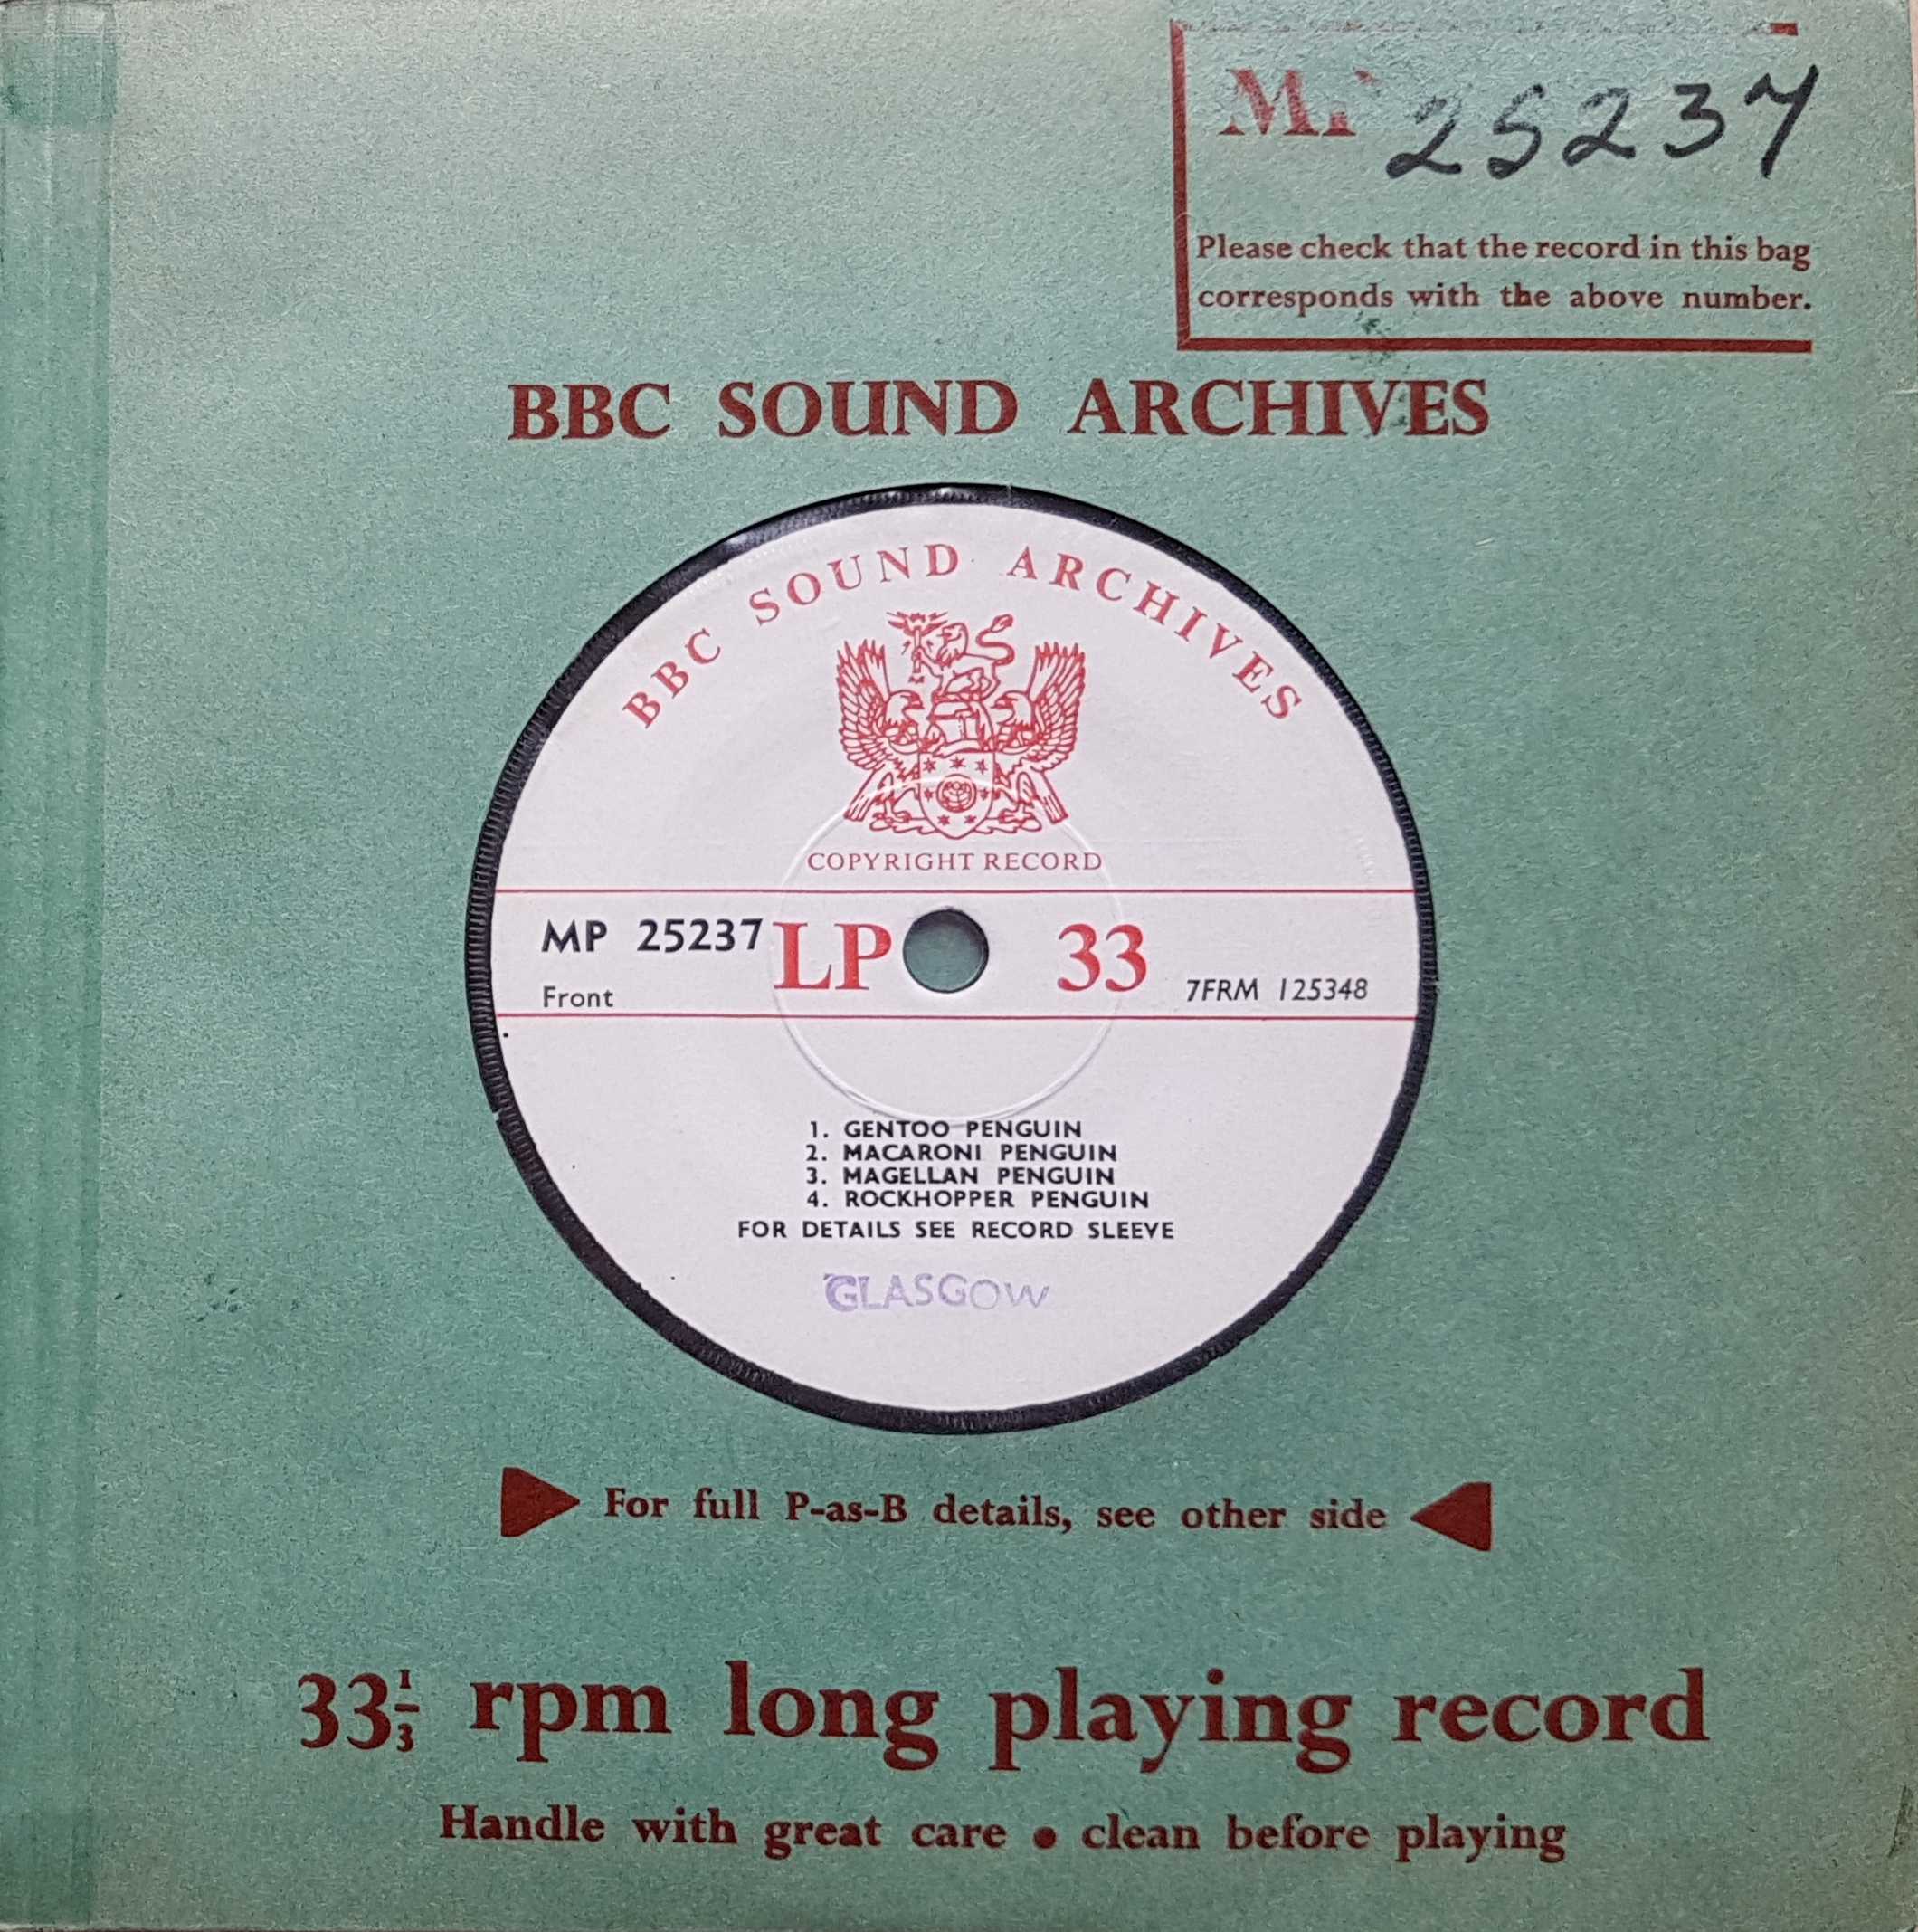 Picture of MP 25237 Animals by artist Not registered from the BBC singles - Records and Tapes library